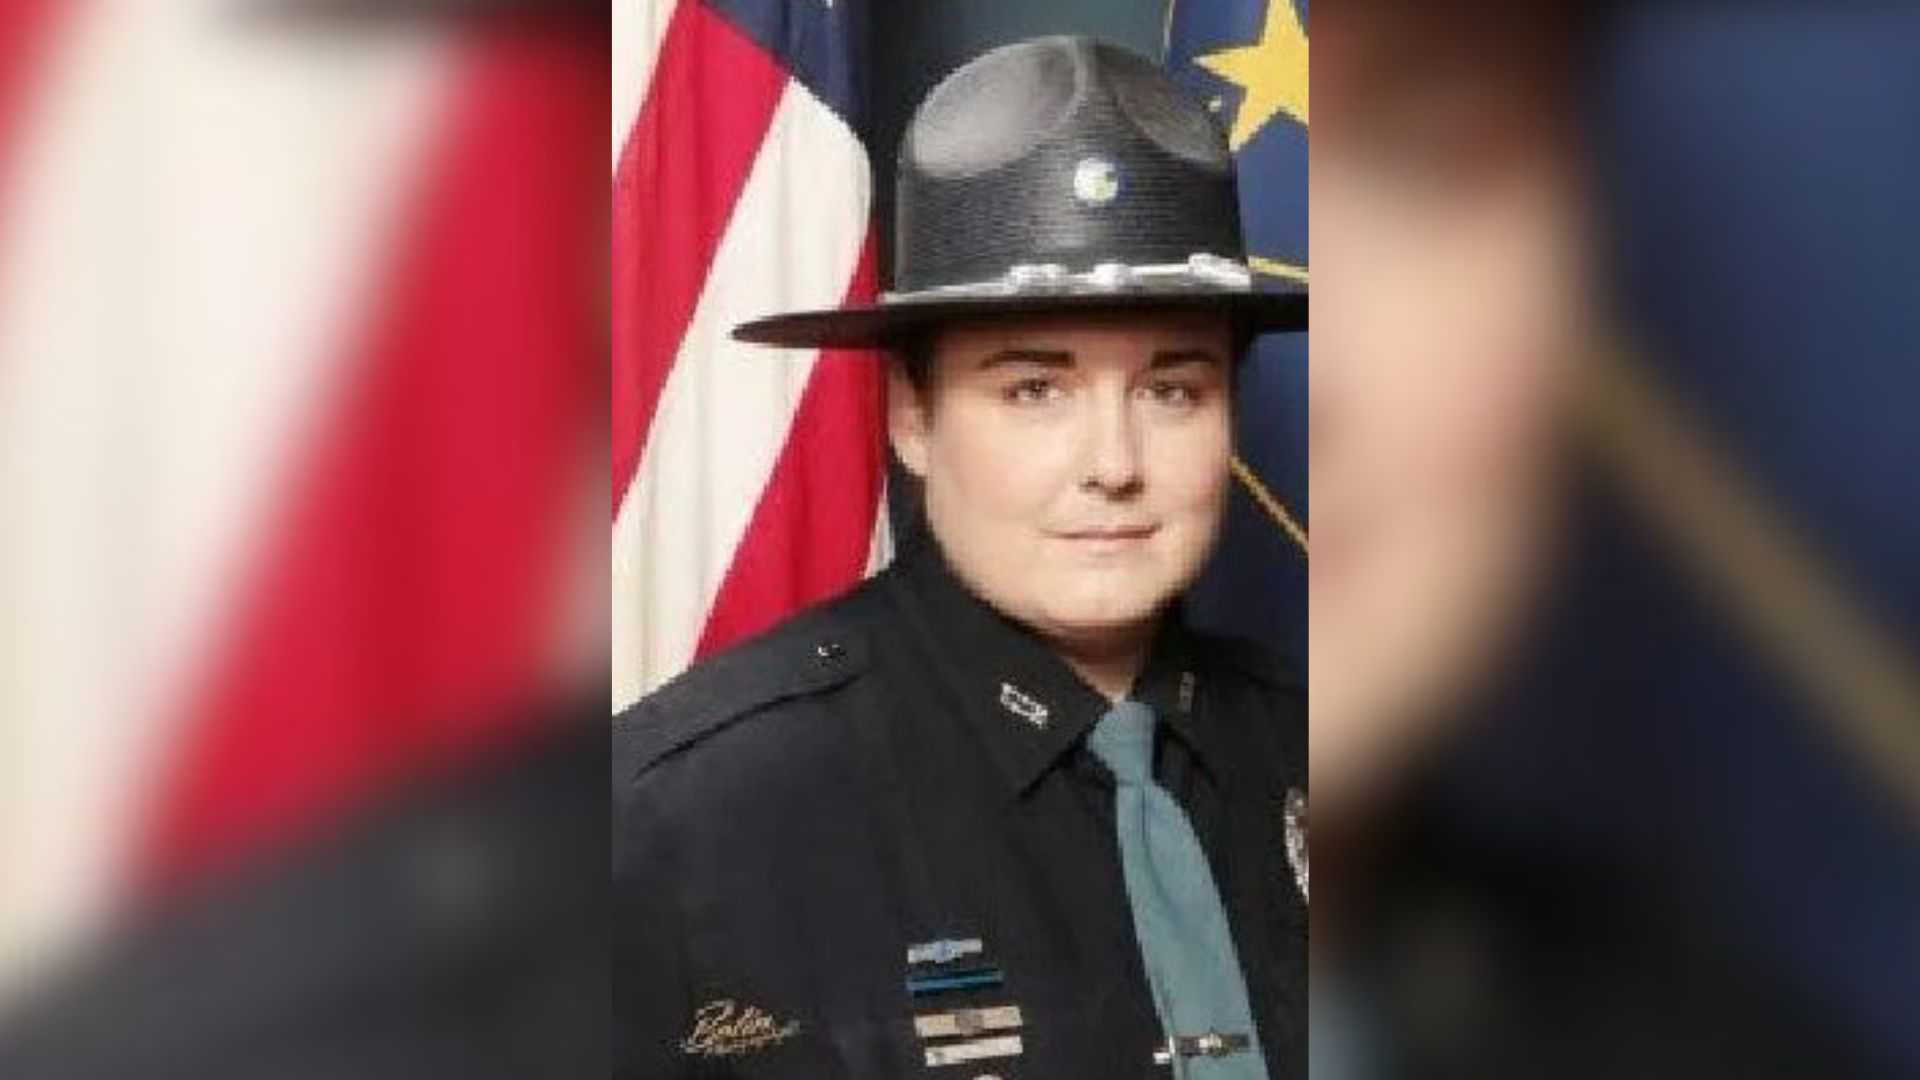 Account set up to benefit family of southern Indiana police officer ...